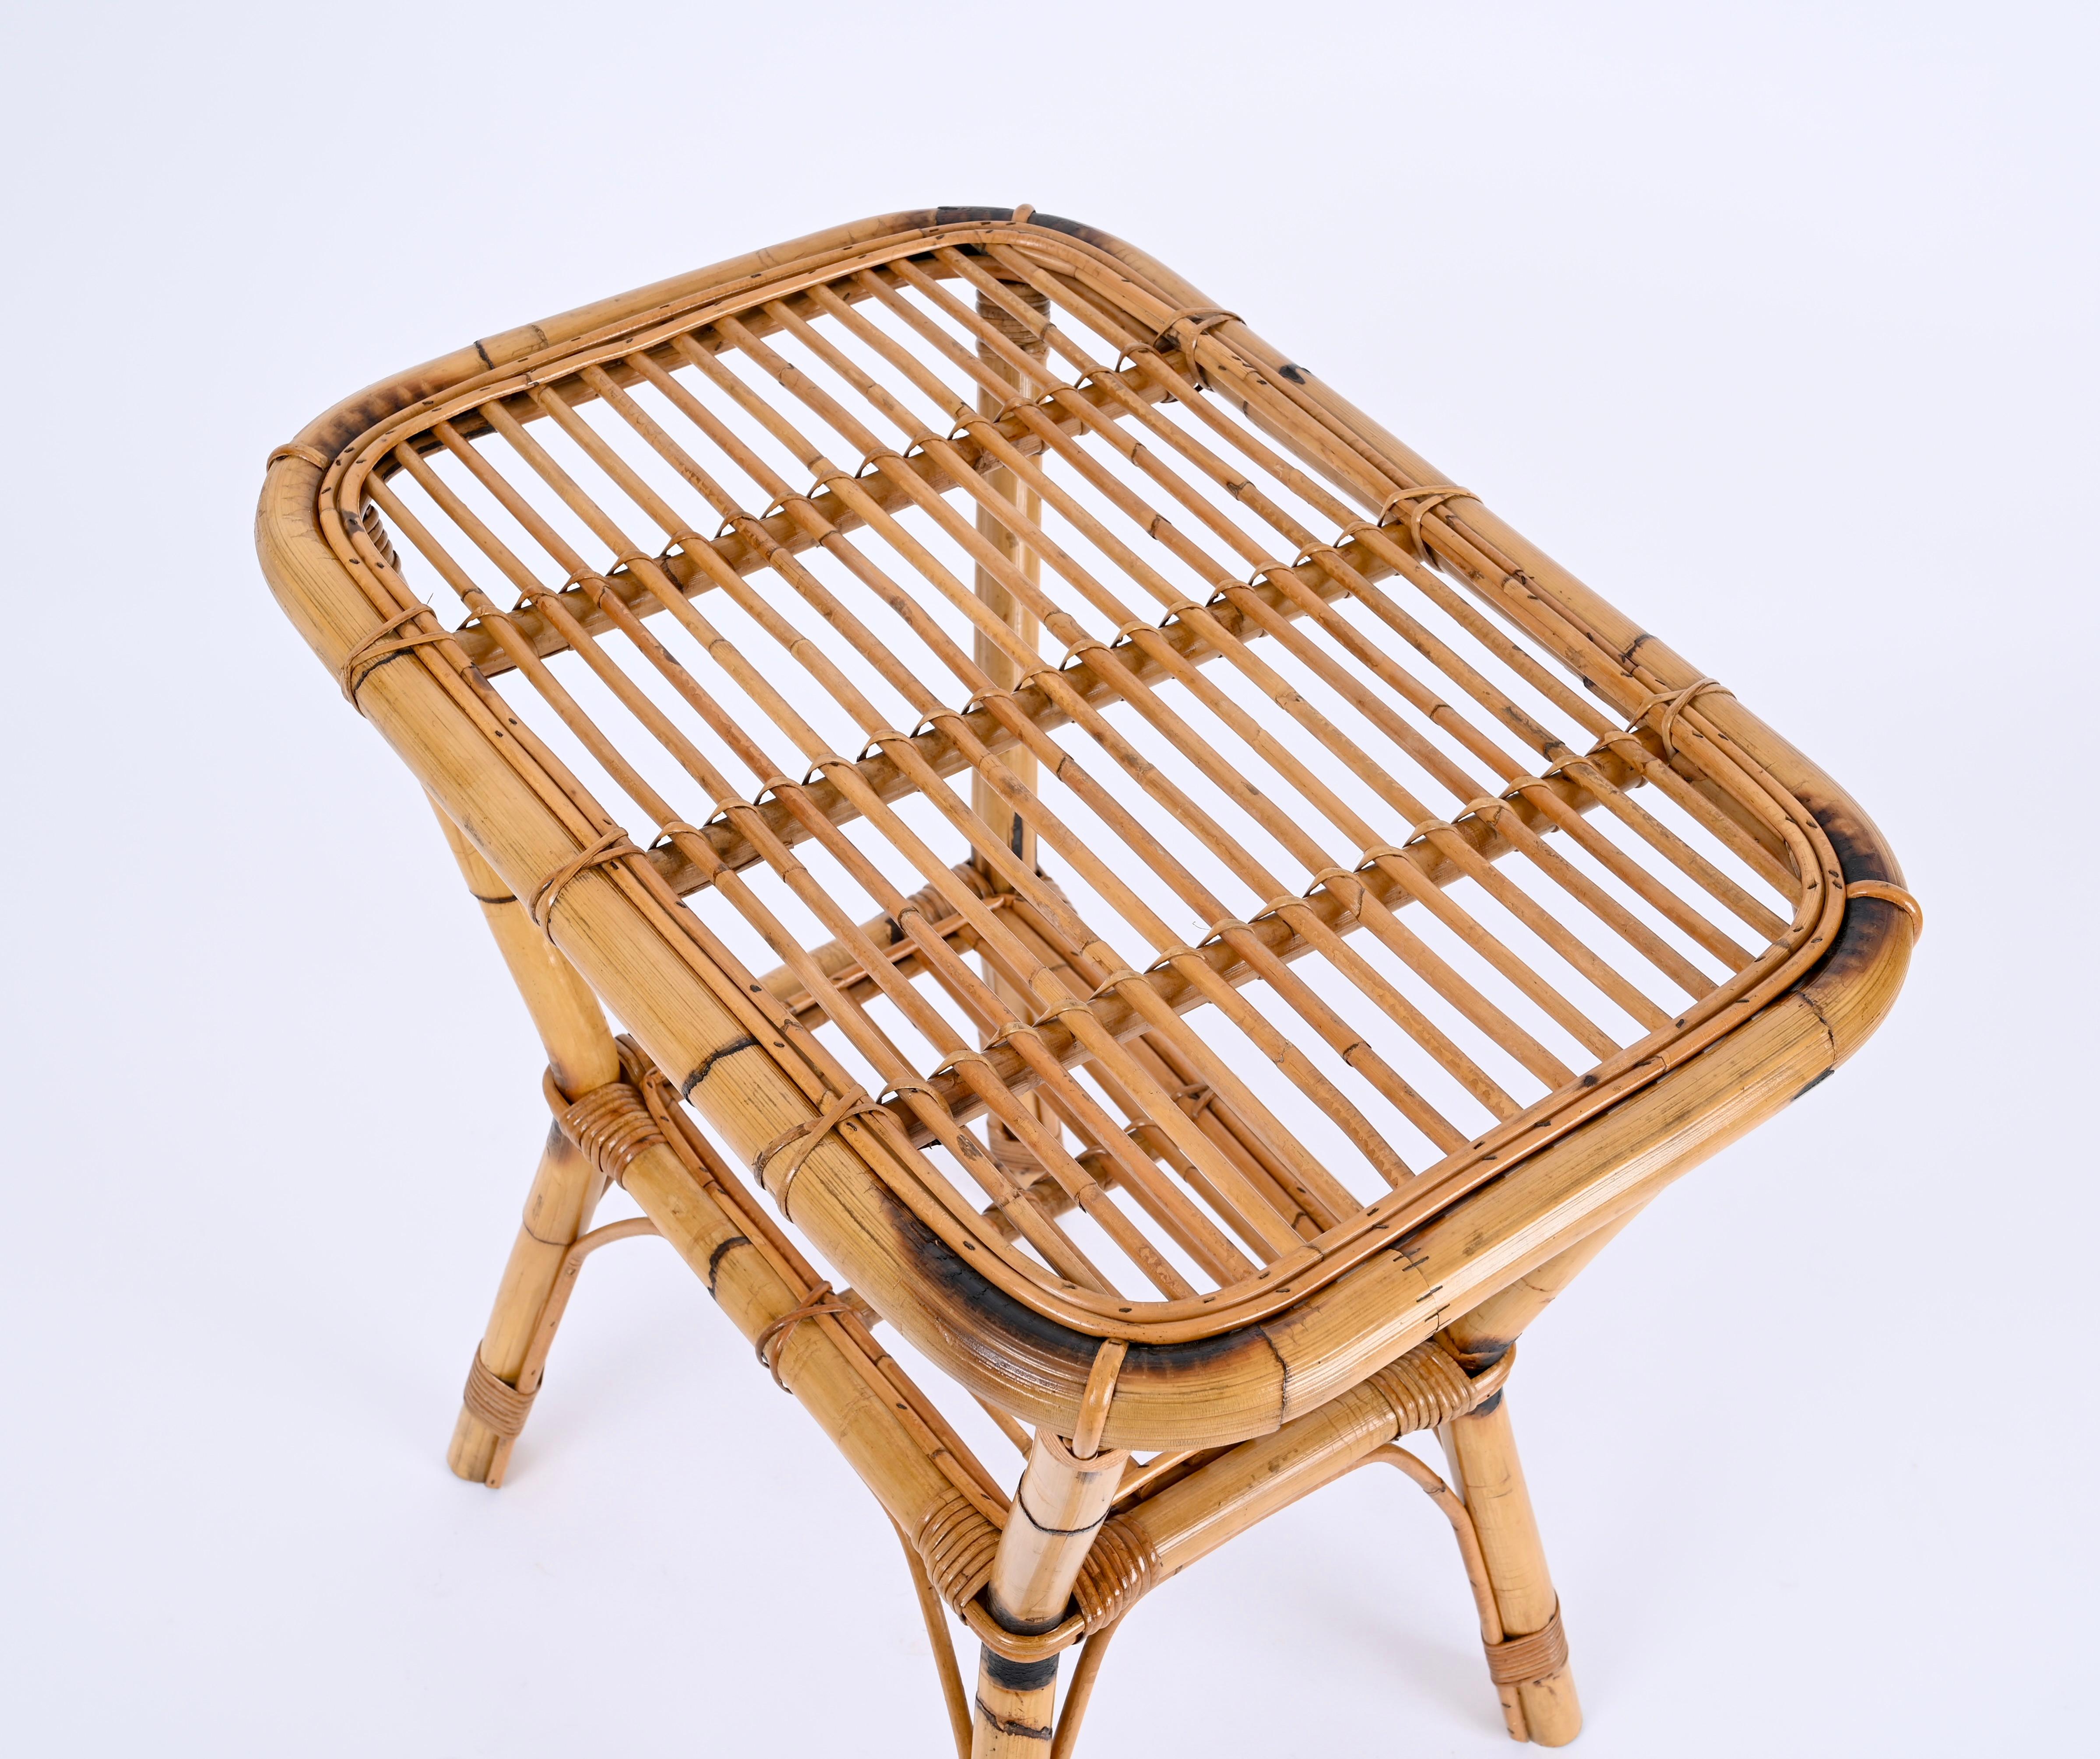 Hand-Woven French Riviera Side or Coffee Table in Rattan, Bamboo and Wicker, Italy 1960s For Sale